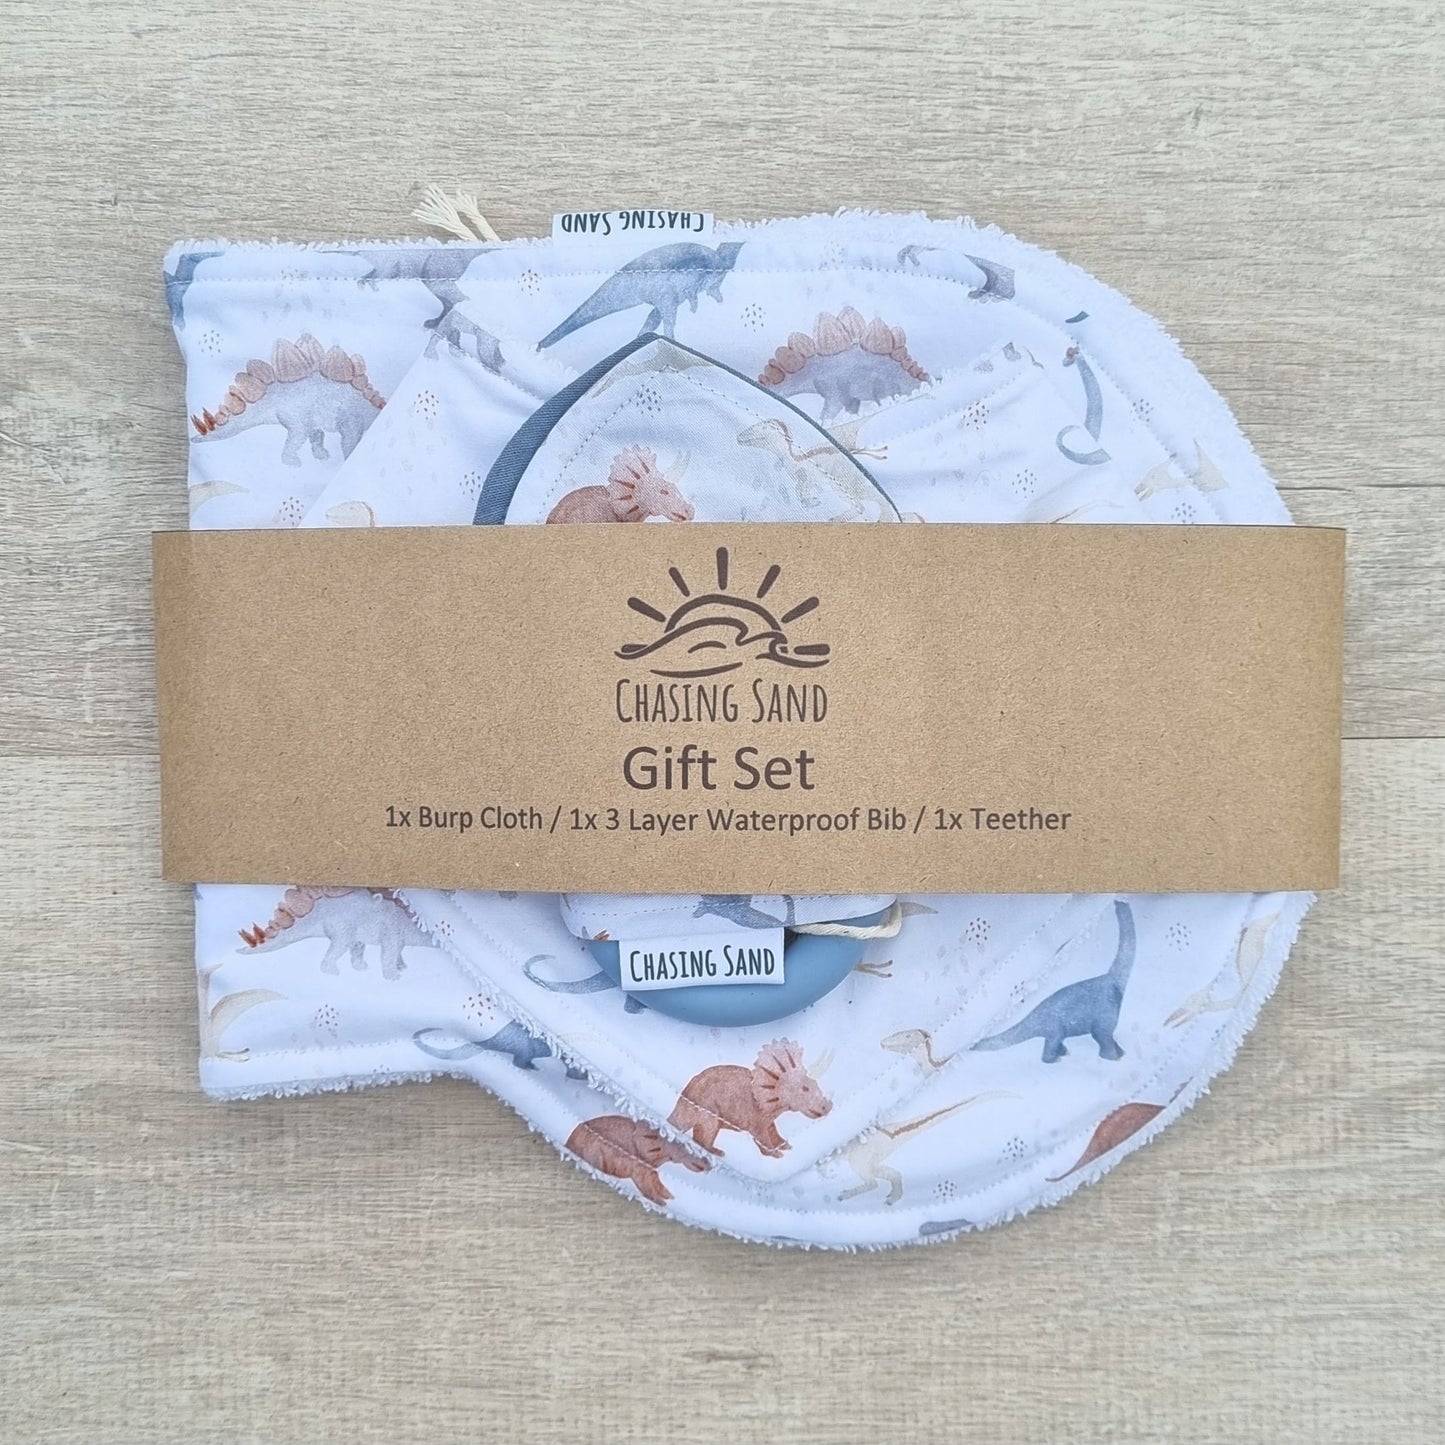 3 Piece Gift Set - Dino against wooden backdrop. Watercolour dinosaur illustrations white background. Each set contains 1x Burp Cloth, 1x Dribble Bib and 1x Teether.